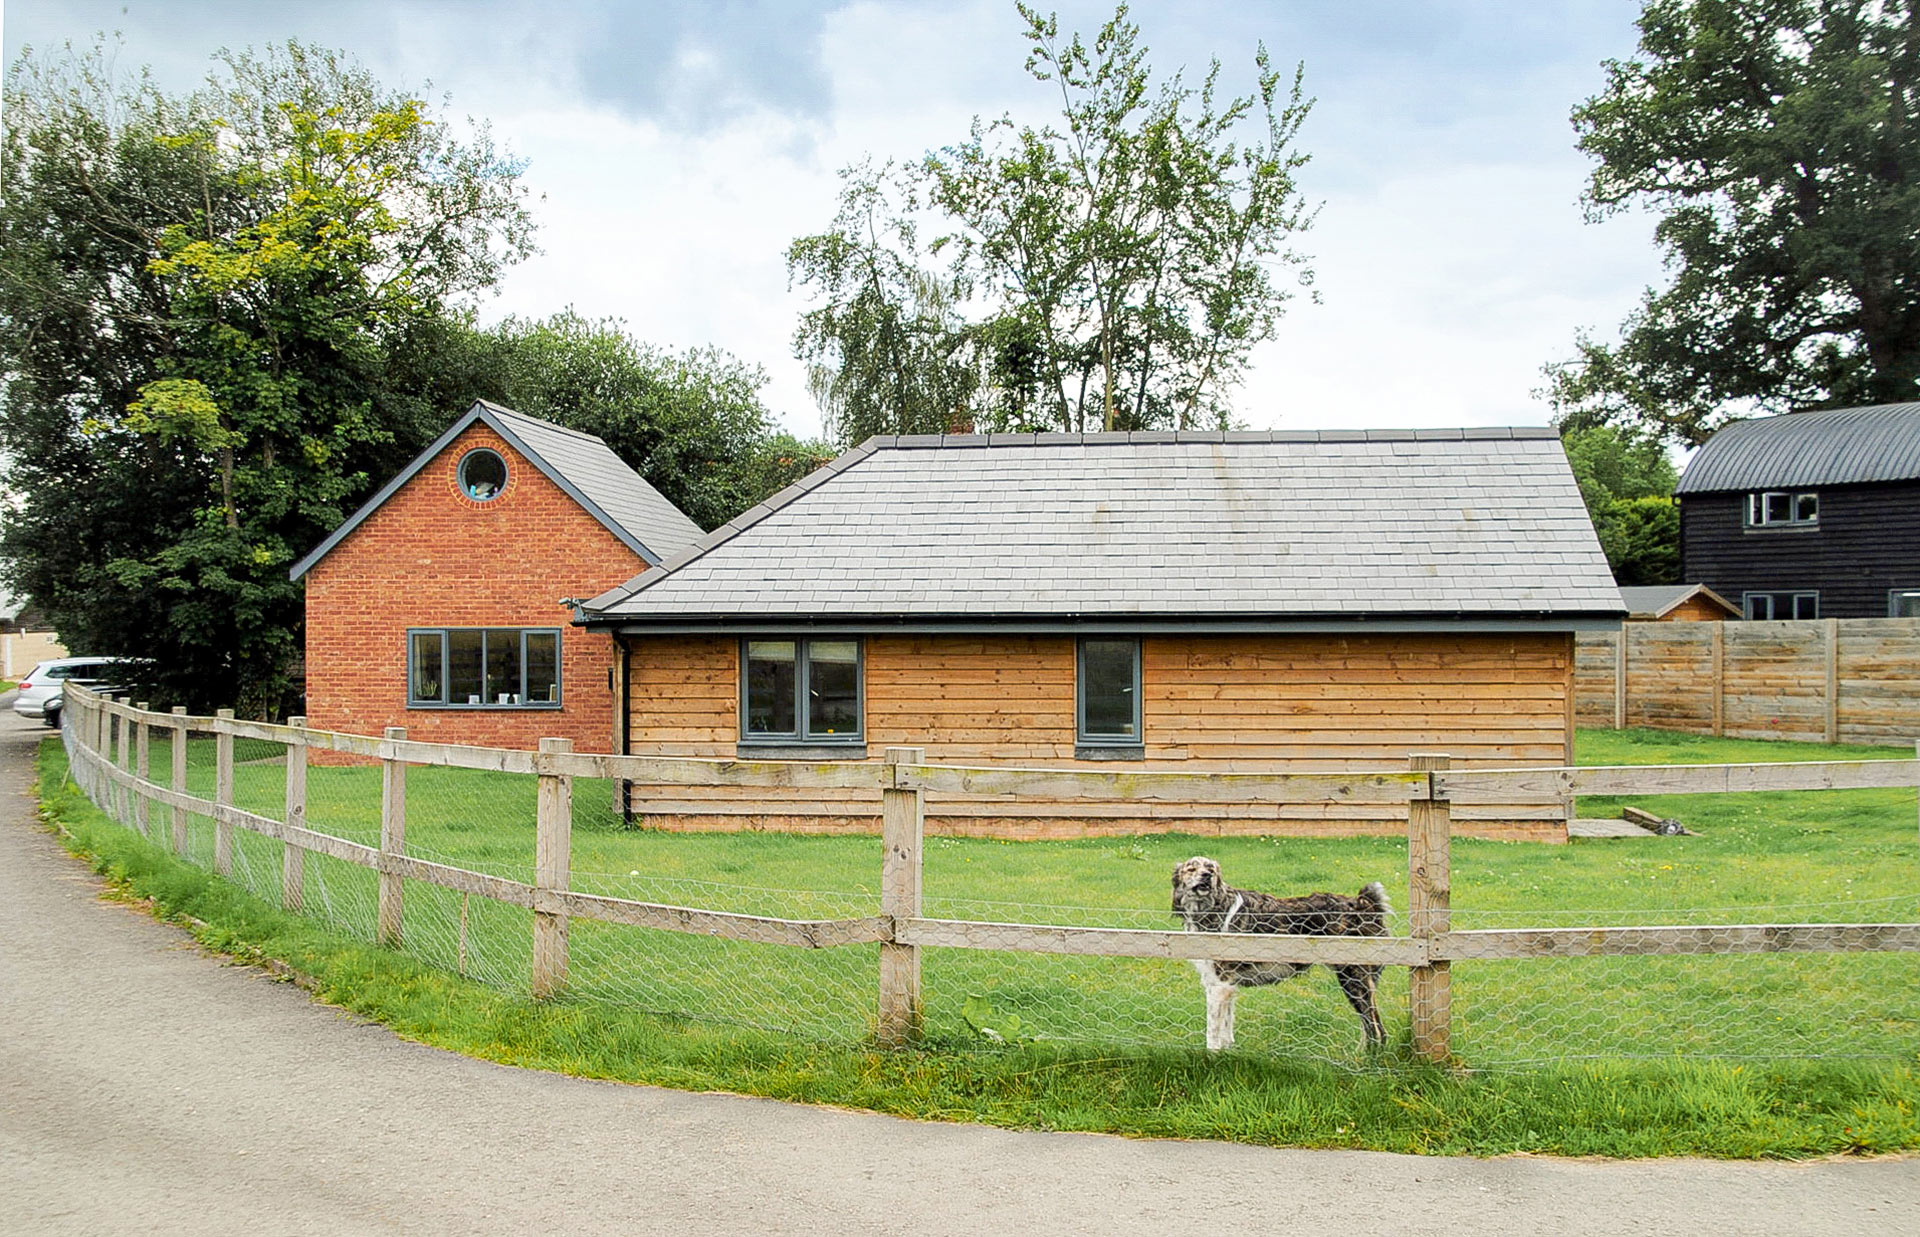 Class Q barn conversion surrounded by fenced garden with dog